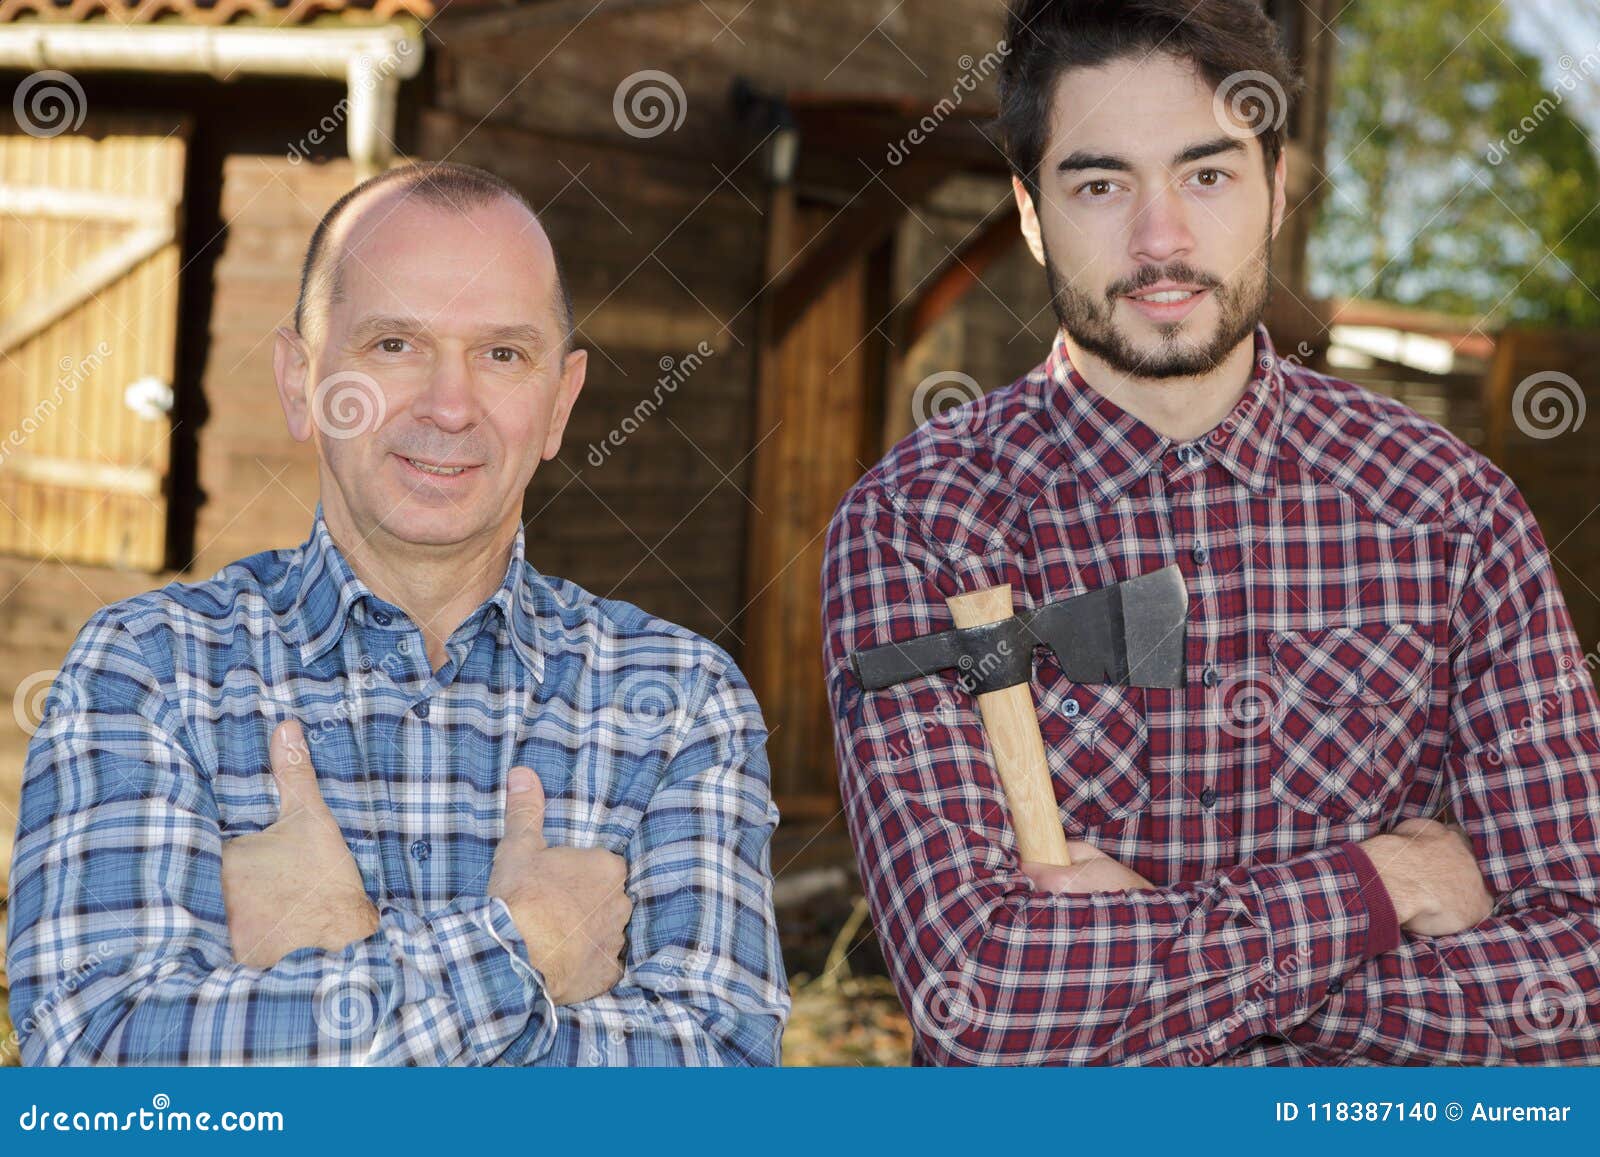 Mature And Young Men Posing Near Wood Hut Holding Axe Stock Photo